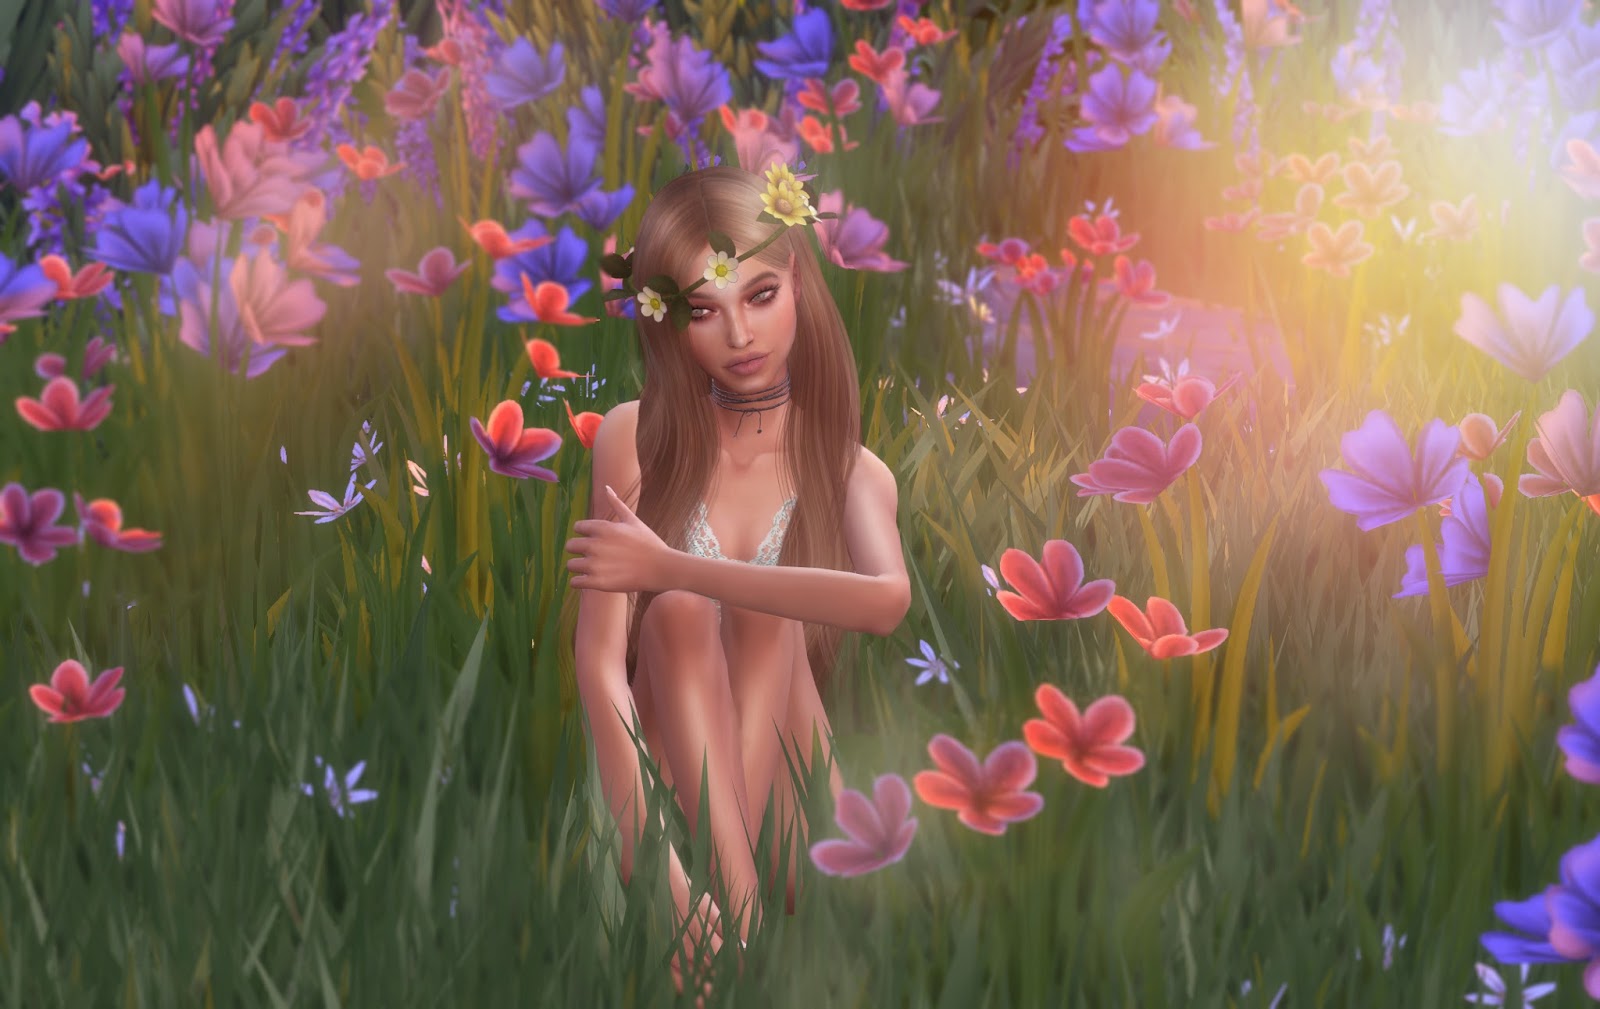 Contented cc. SIMS 4 beautiful girl. Симс 4 цветы. Moon Galaxy SIMS. Valley girls симс 4 черта характера.